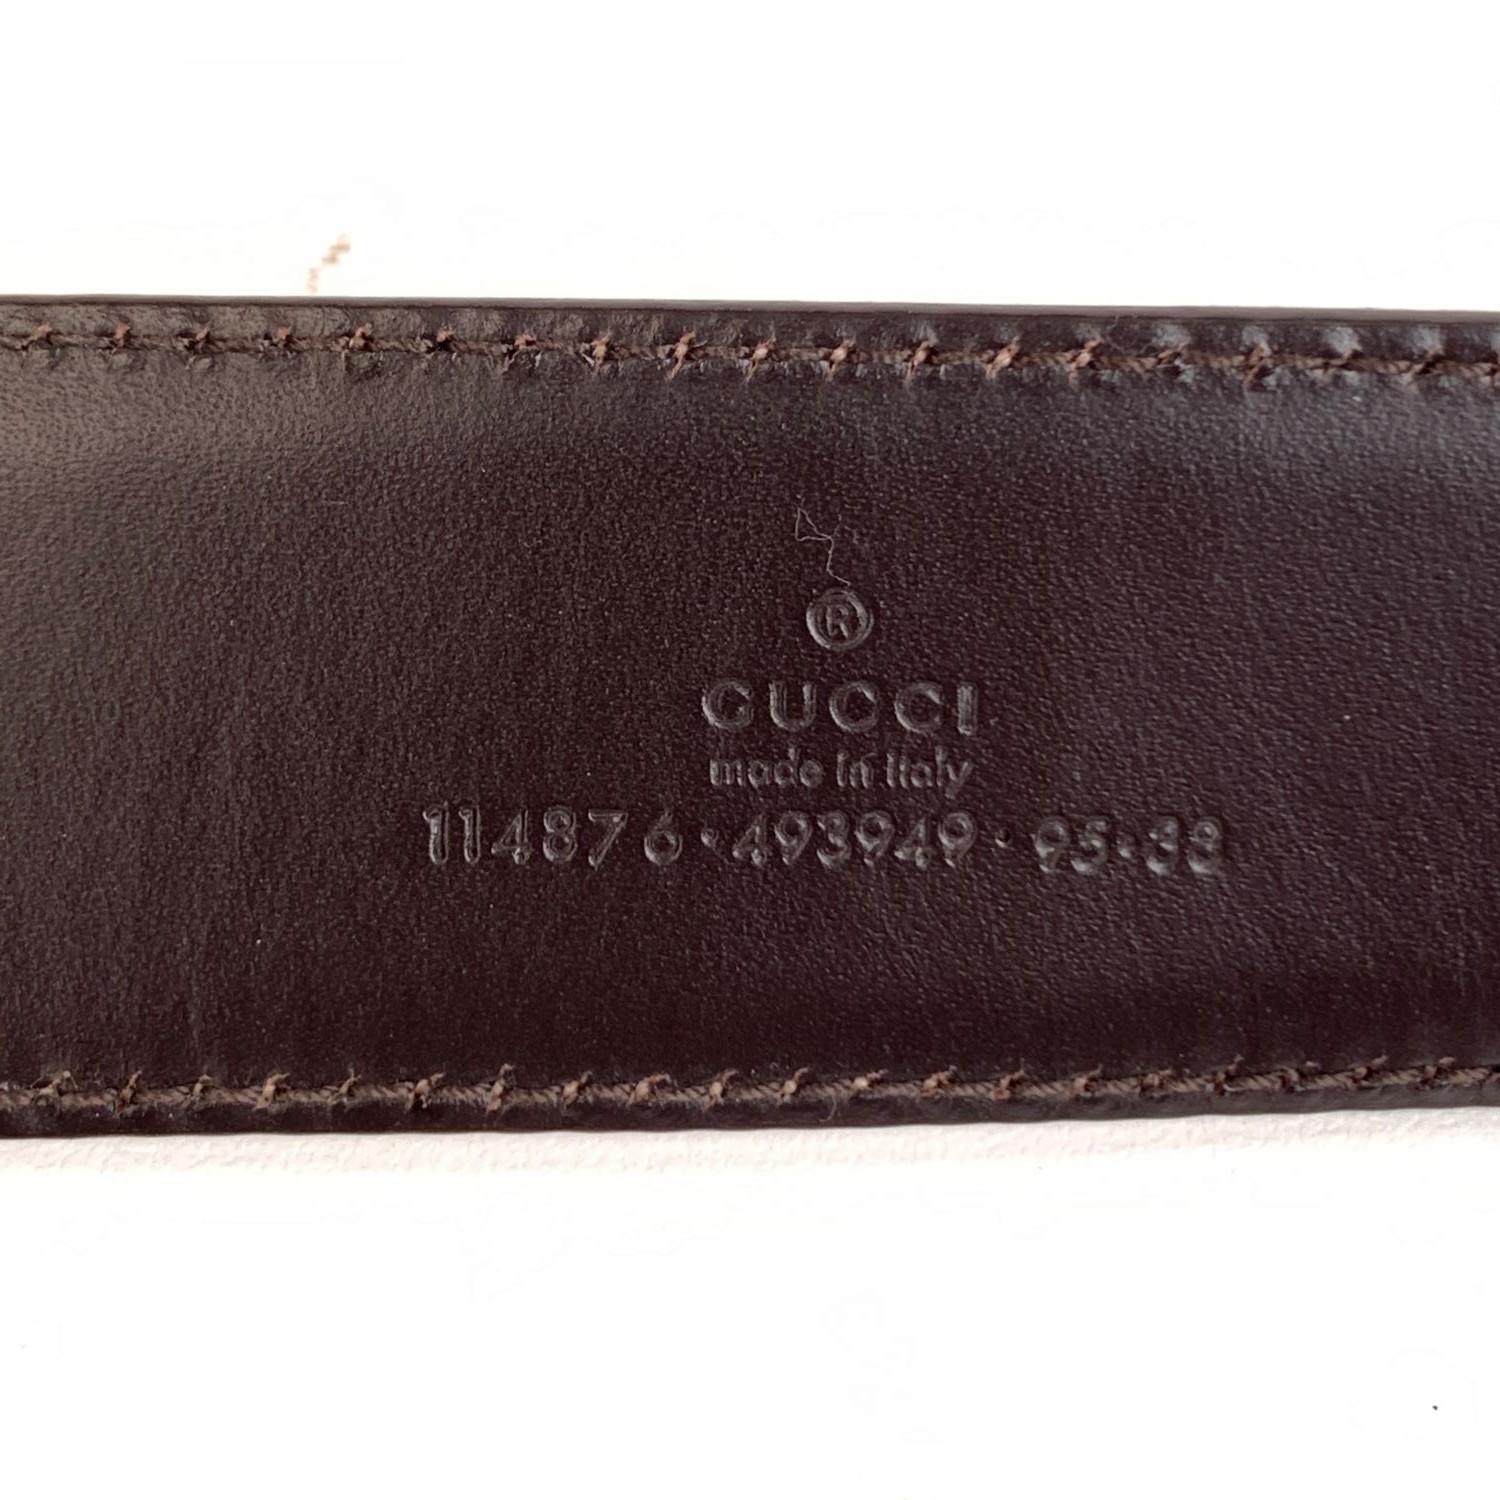 Brown Gucci Tan Guccissima Monogram Leather Belt GG Buckle Size 95/38